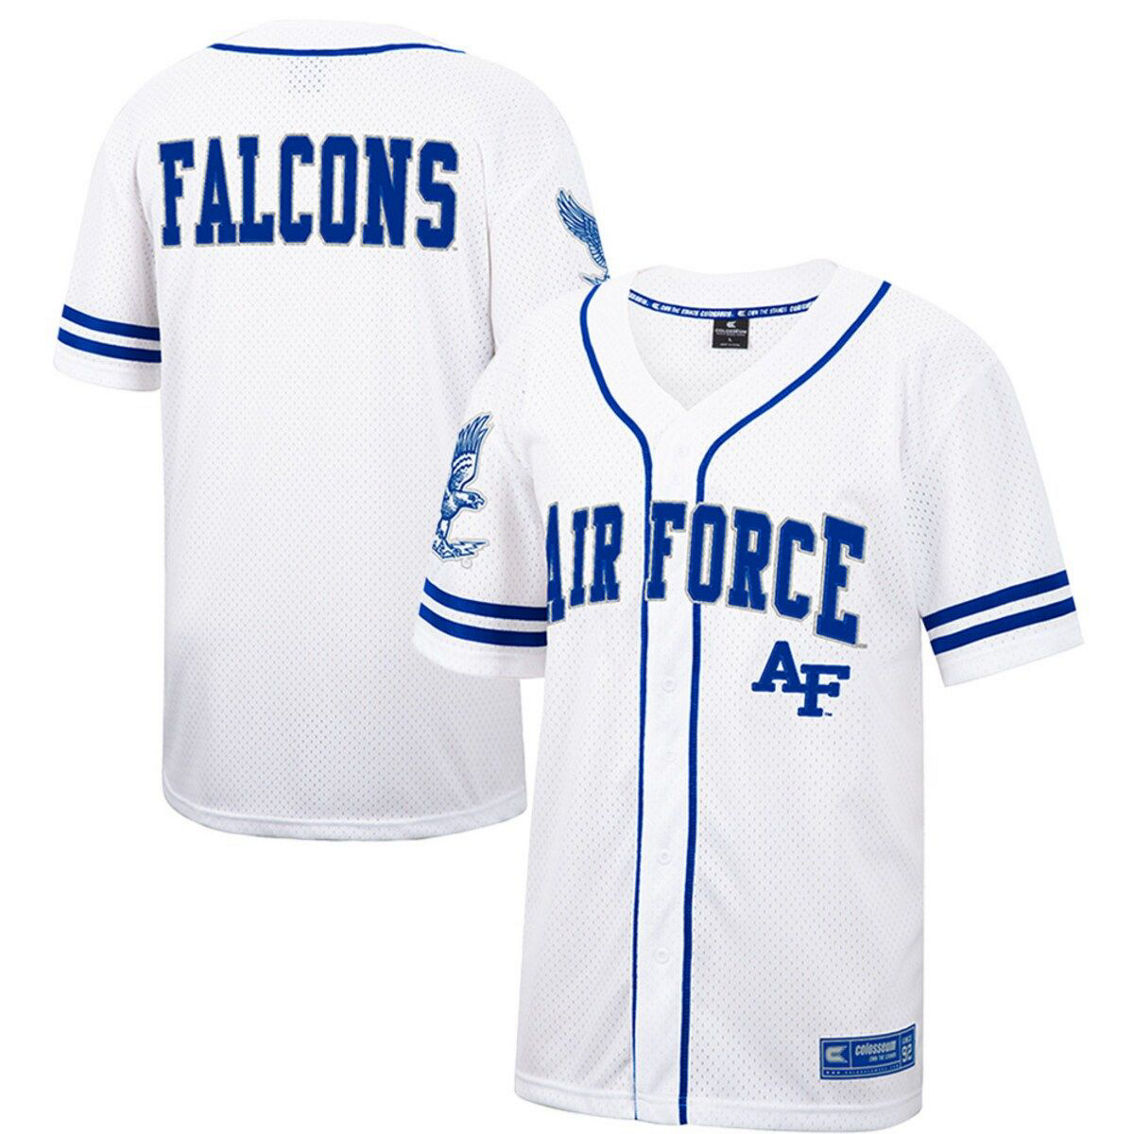 Colosseum Men's White Air Force Falcons Free Spirited Mesh Button-Up Baseball Jersey - Image 2 of 4